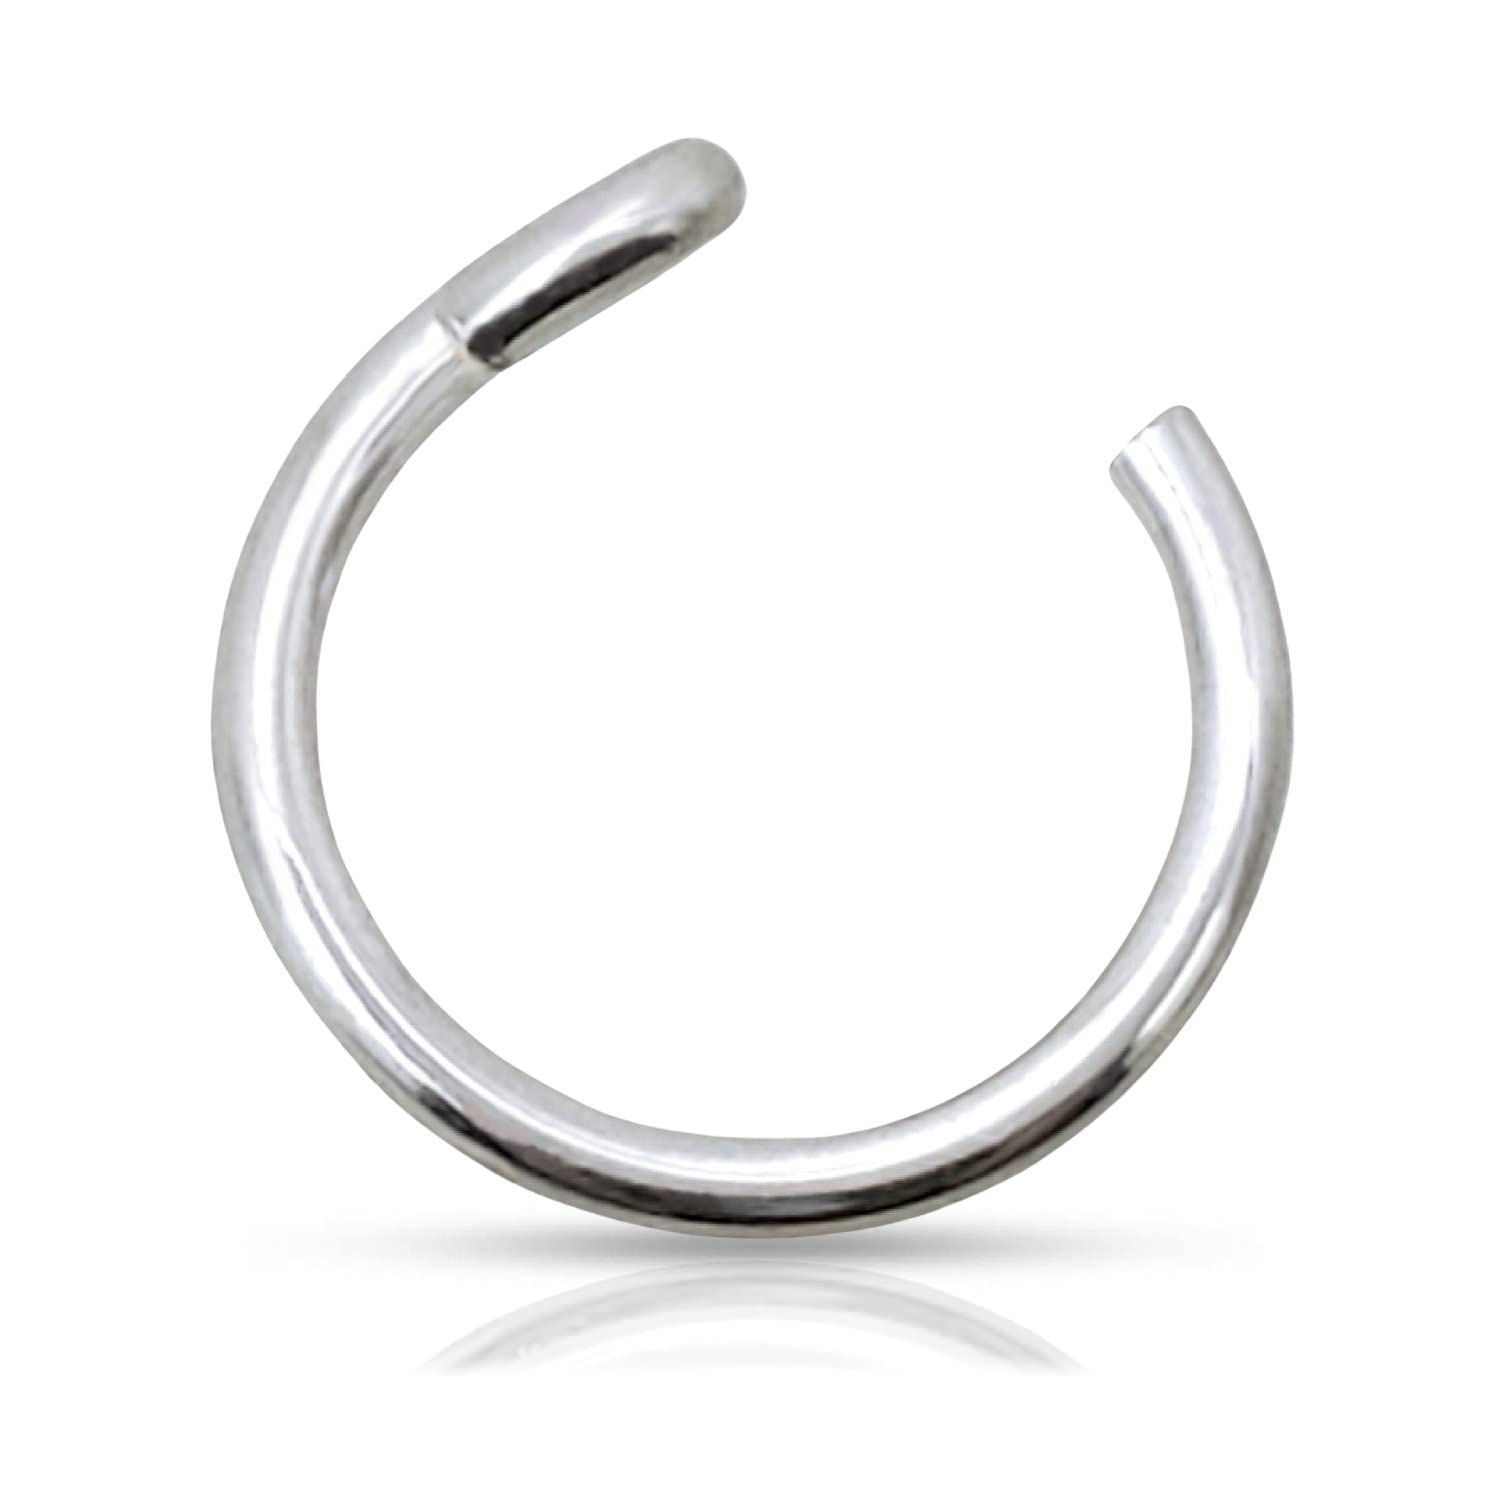 Fake Clip On Nose Ring 20g - 925 Sterling Silver Tiny Faux Piercing Hoop - No Piercing Needed